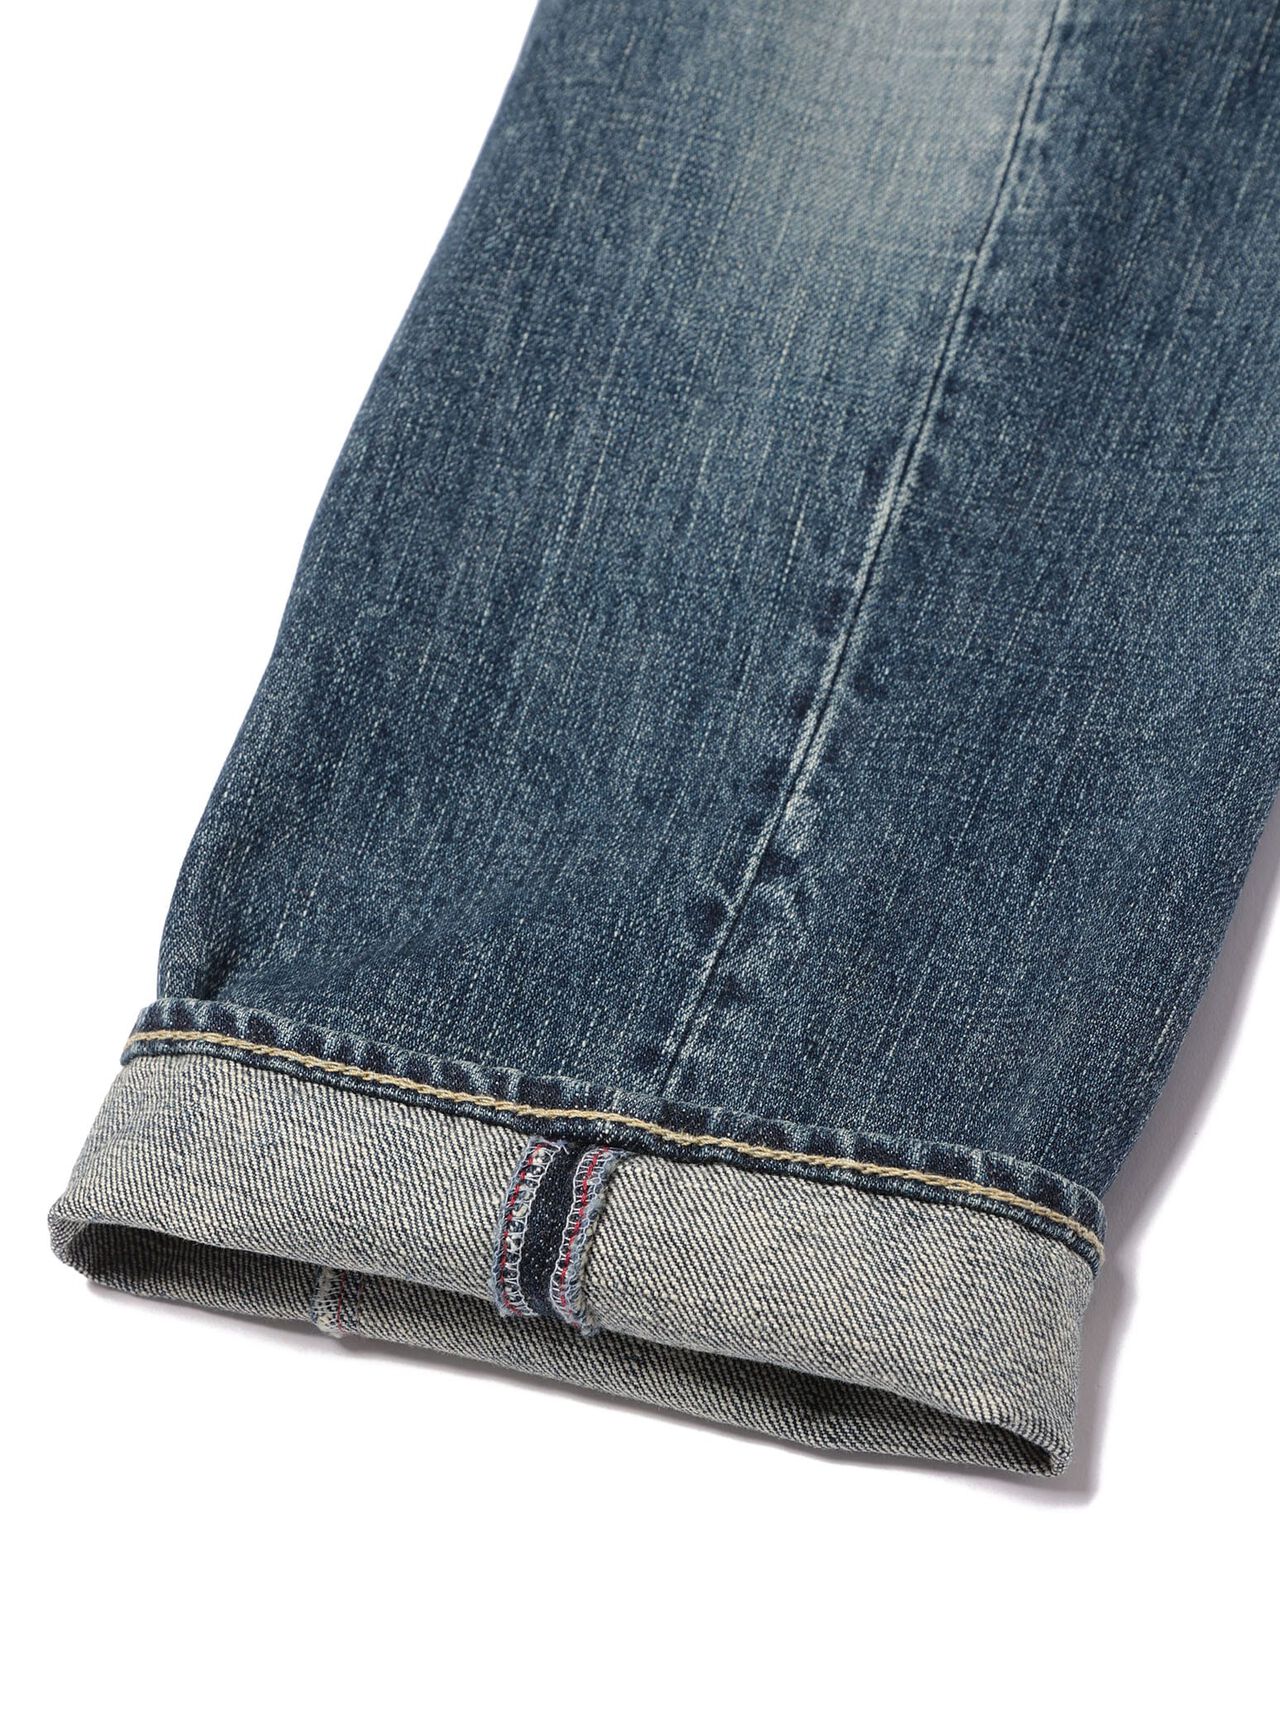 Jeans - butt 22-U2 5 years,M, large image number 6